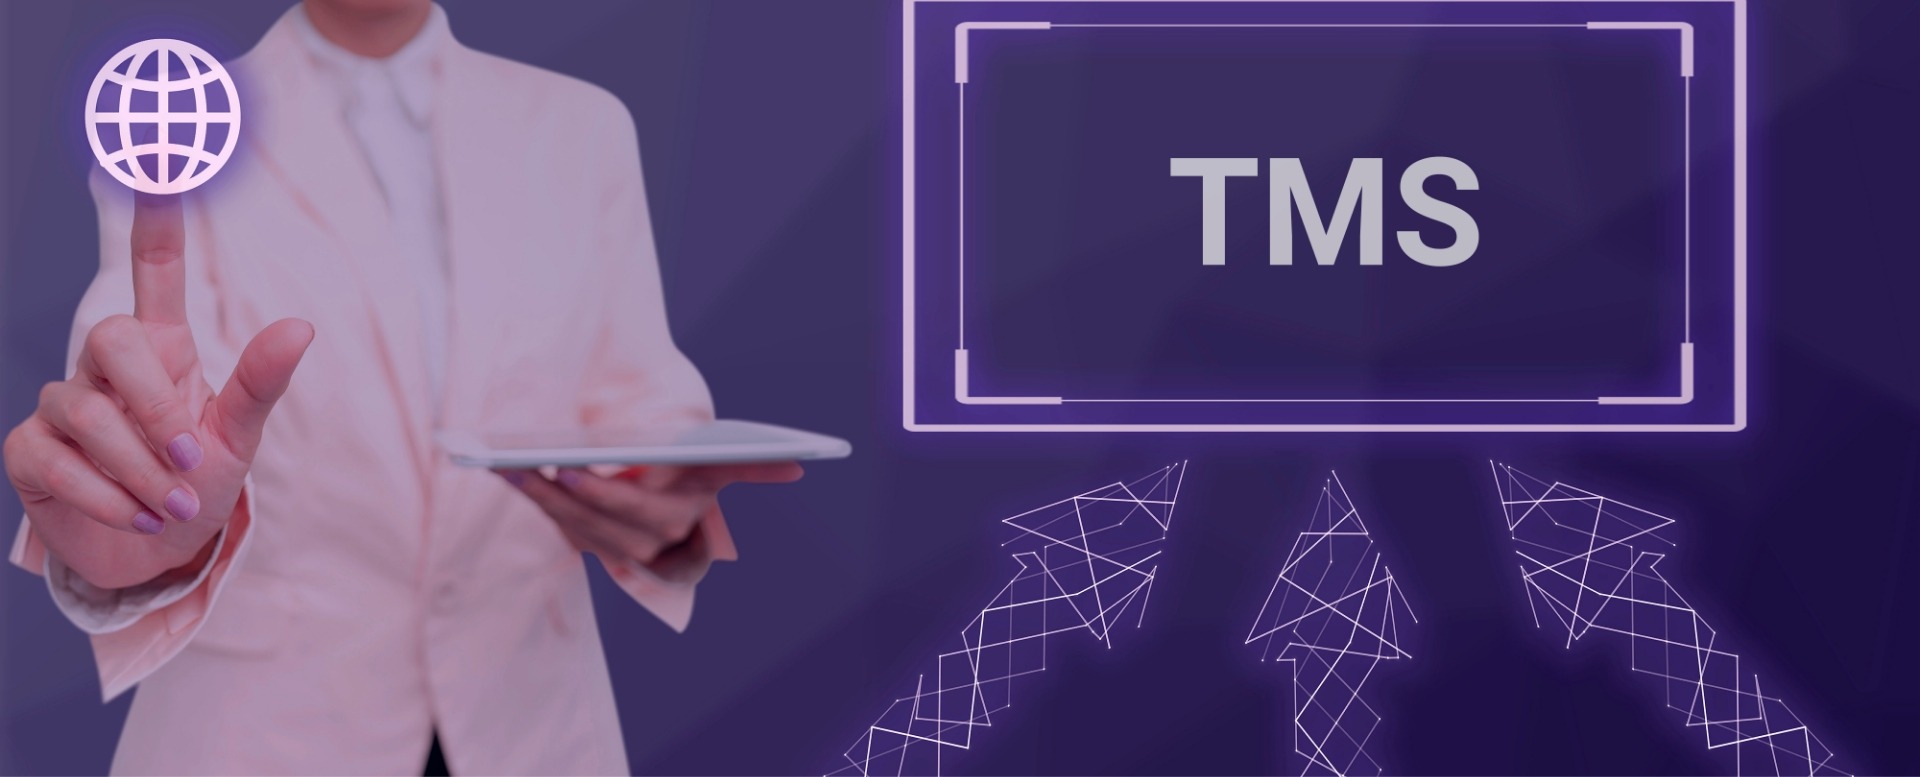 The 6 benefits of successful TMS adoption | Part 2